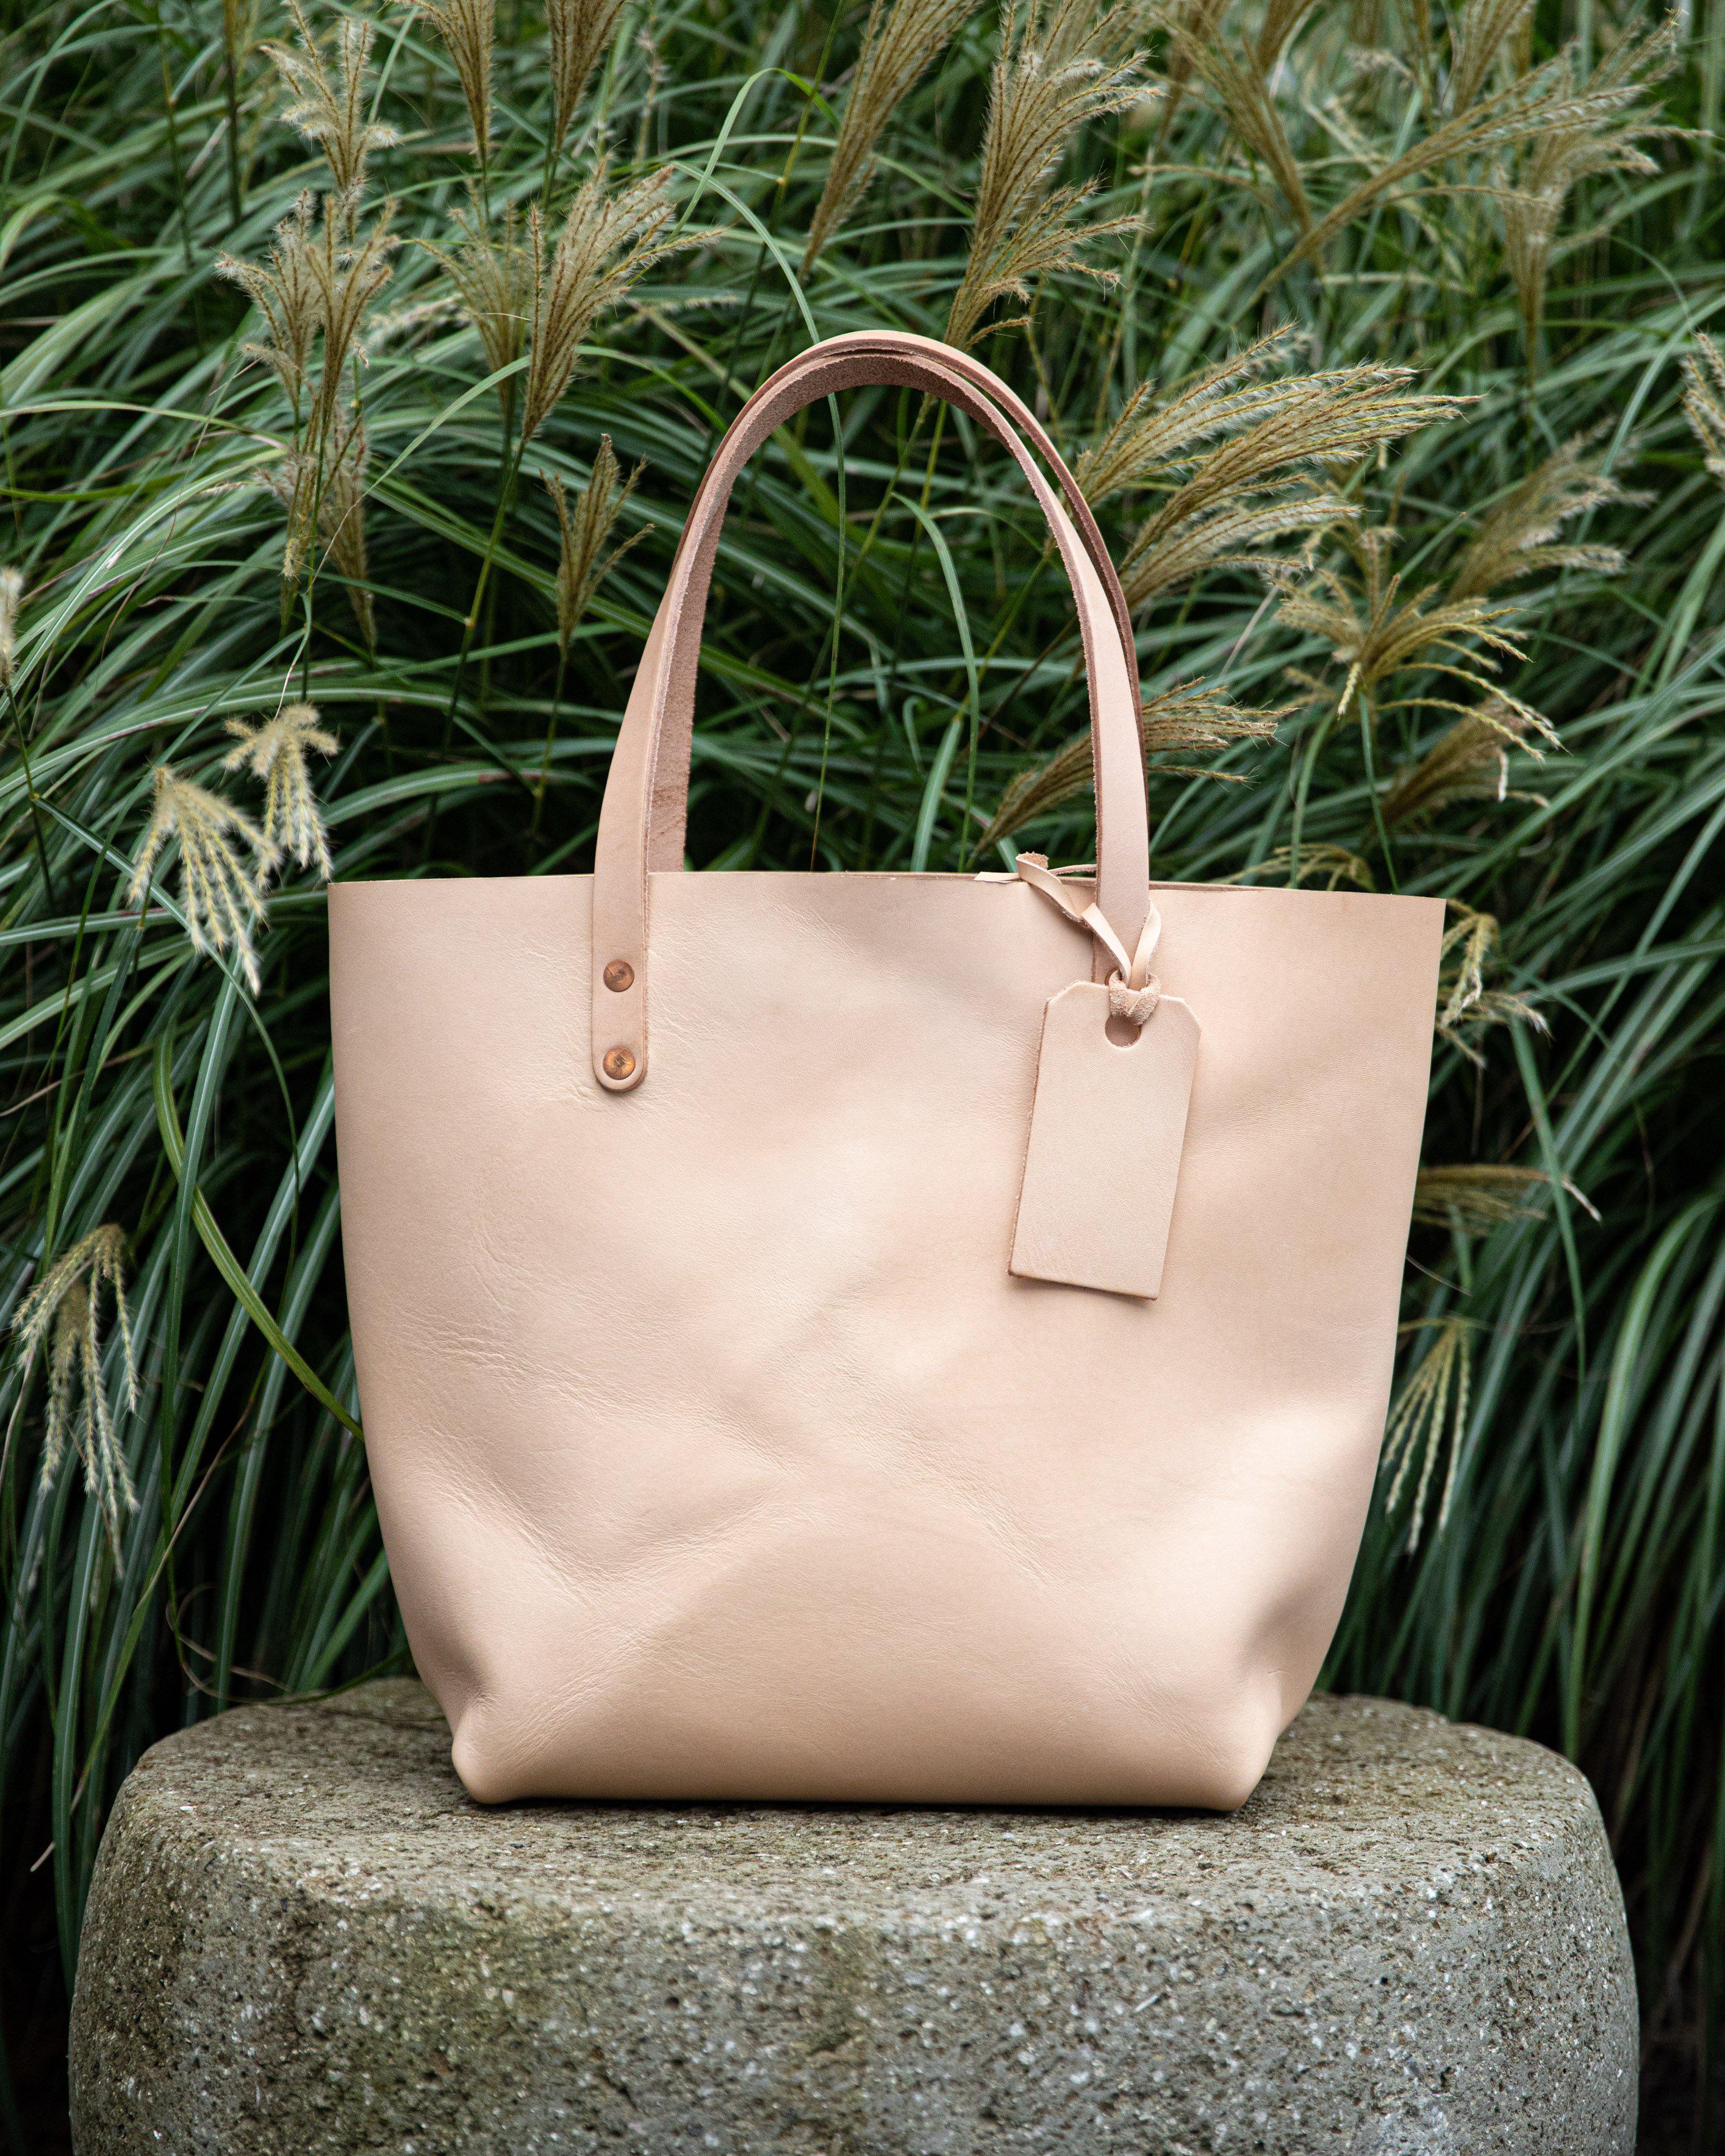 Introducing the Vegetable Tanned Leather Tote: A Perfect Vachetta Tote! 😍